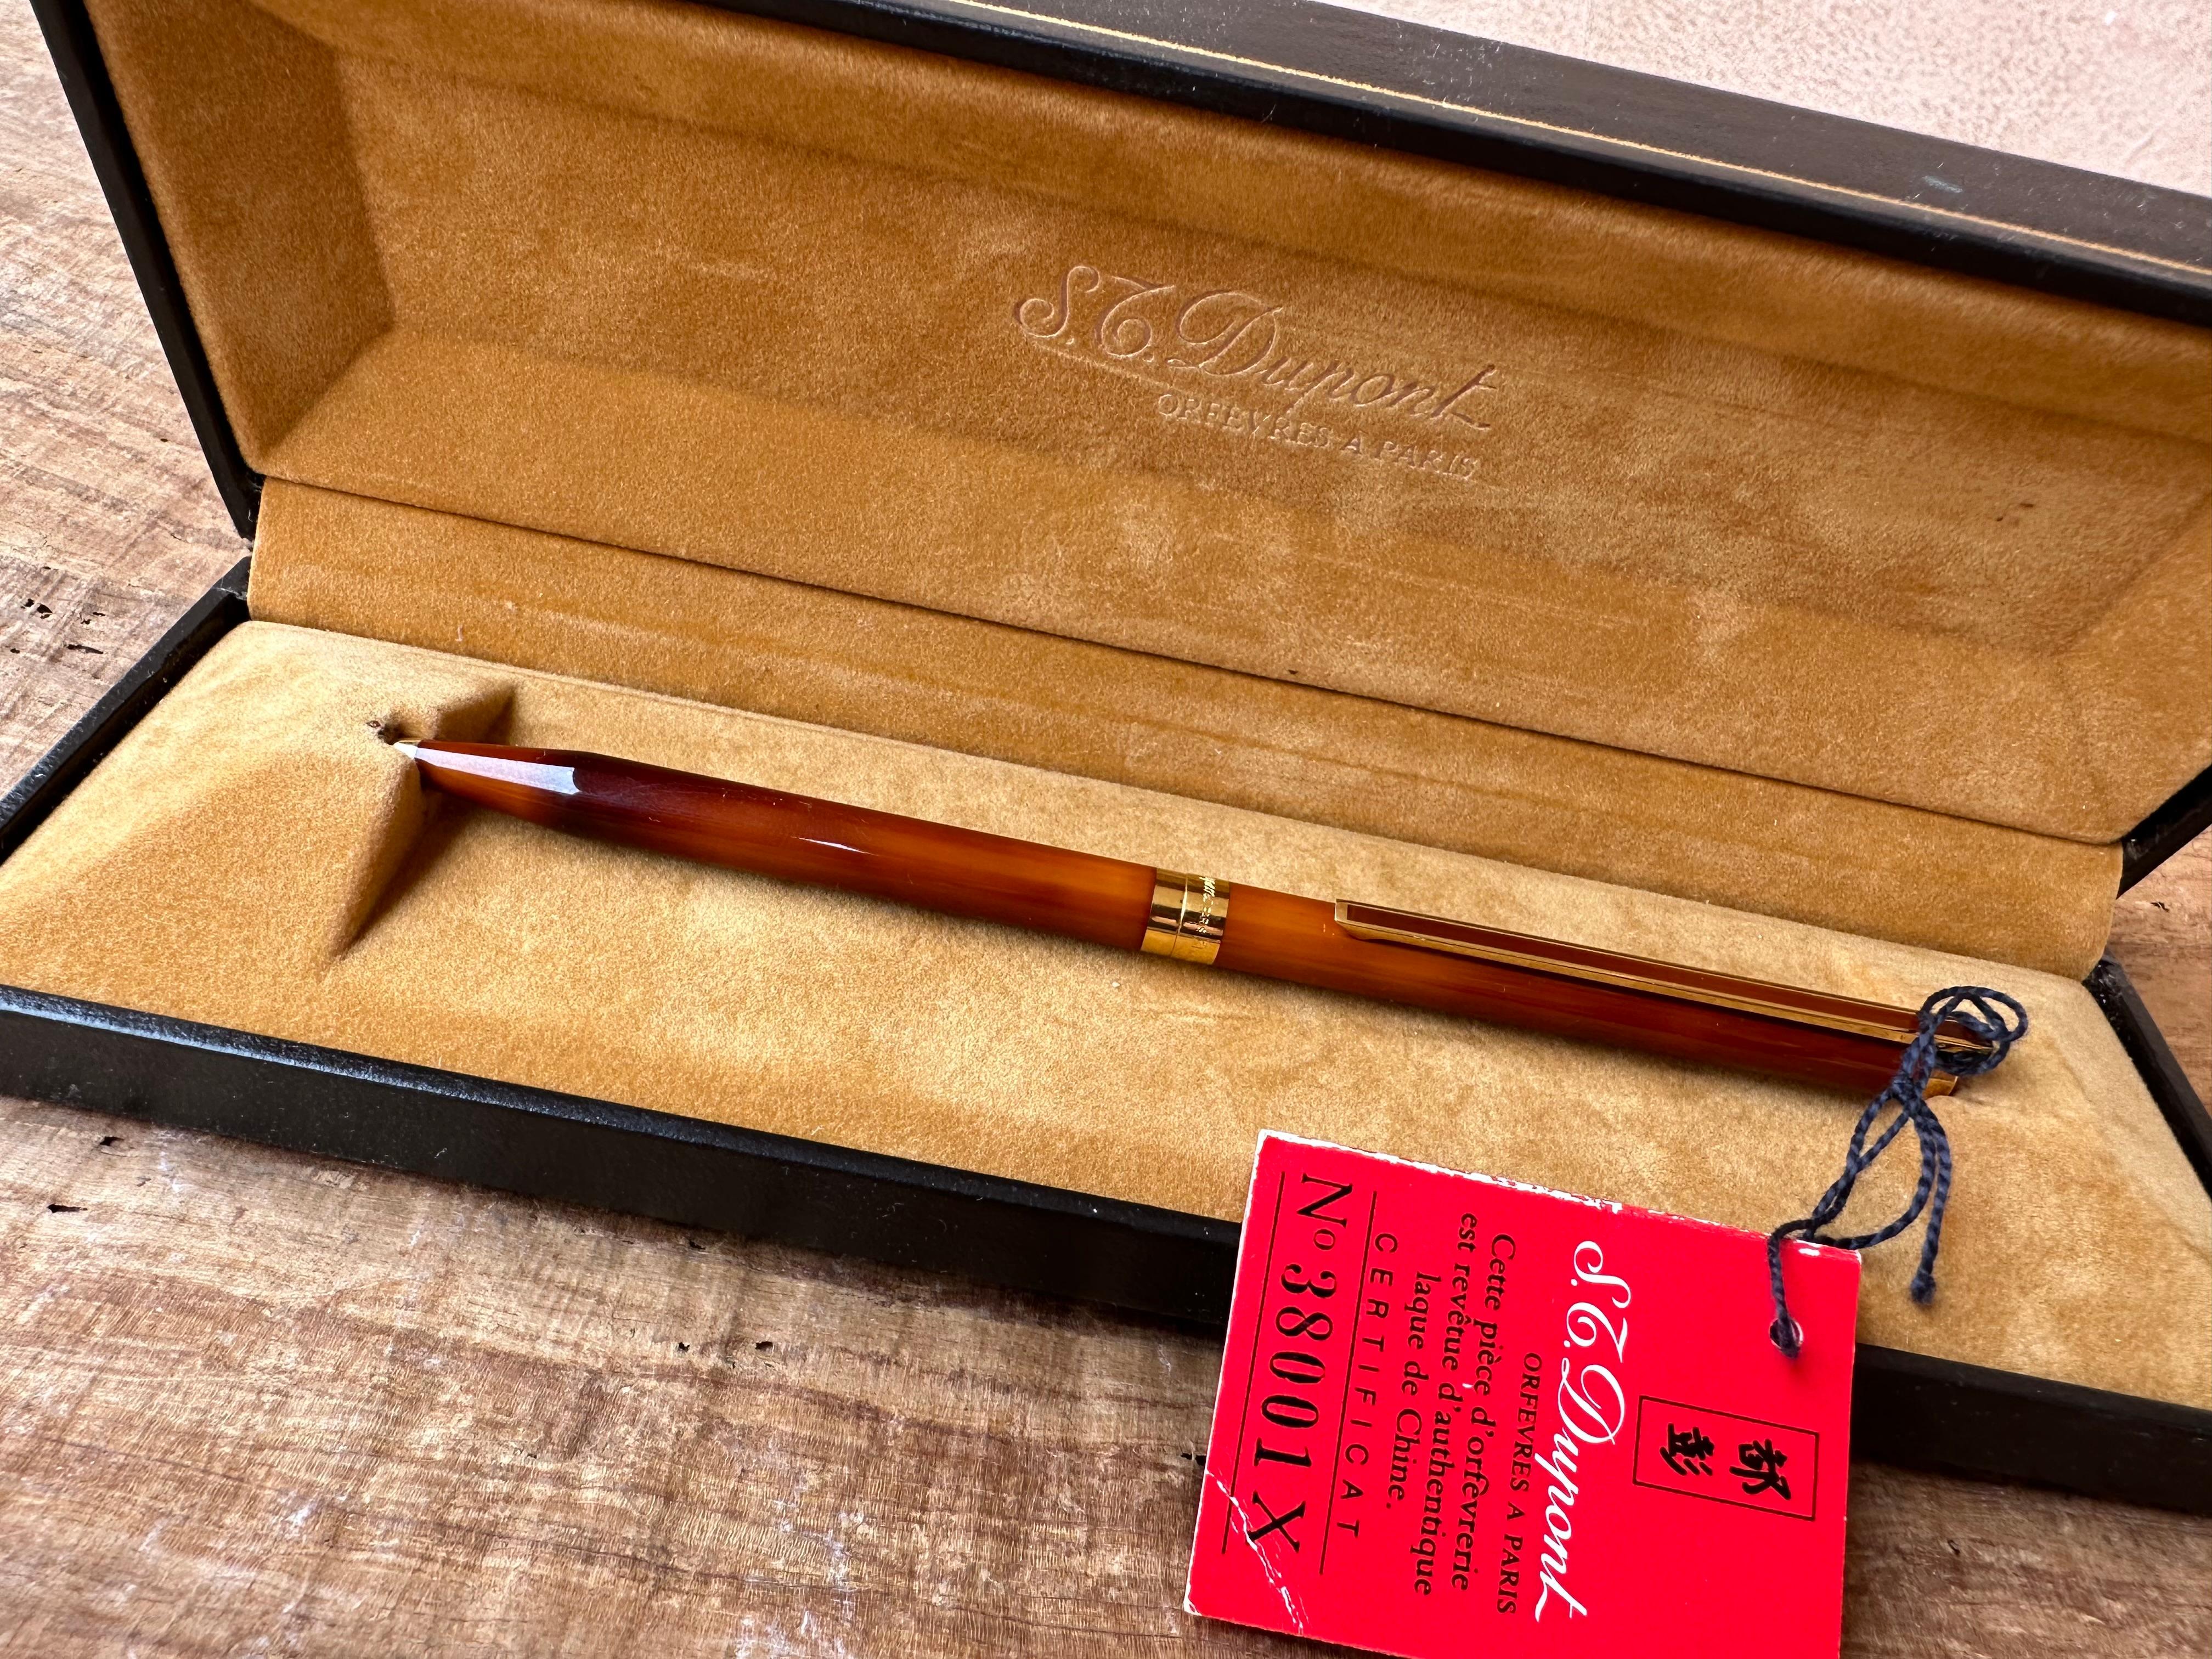 stunning S.T. Dupont Classique ballpoint pen with a vivid Chinese lacquer coat. The trim is 24kt gold plate, as usual per S.T. Dupont pens. Includes its original presentation case. And Tag


Condition : in Excellent Condition Please Check the pics -